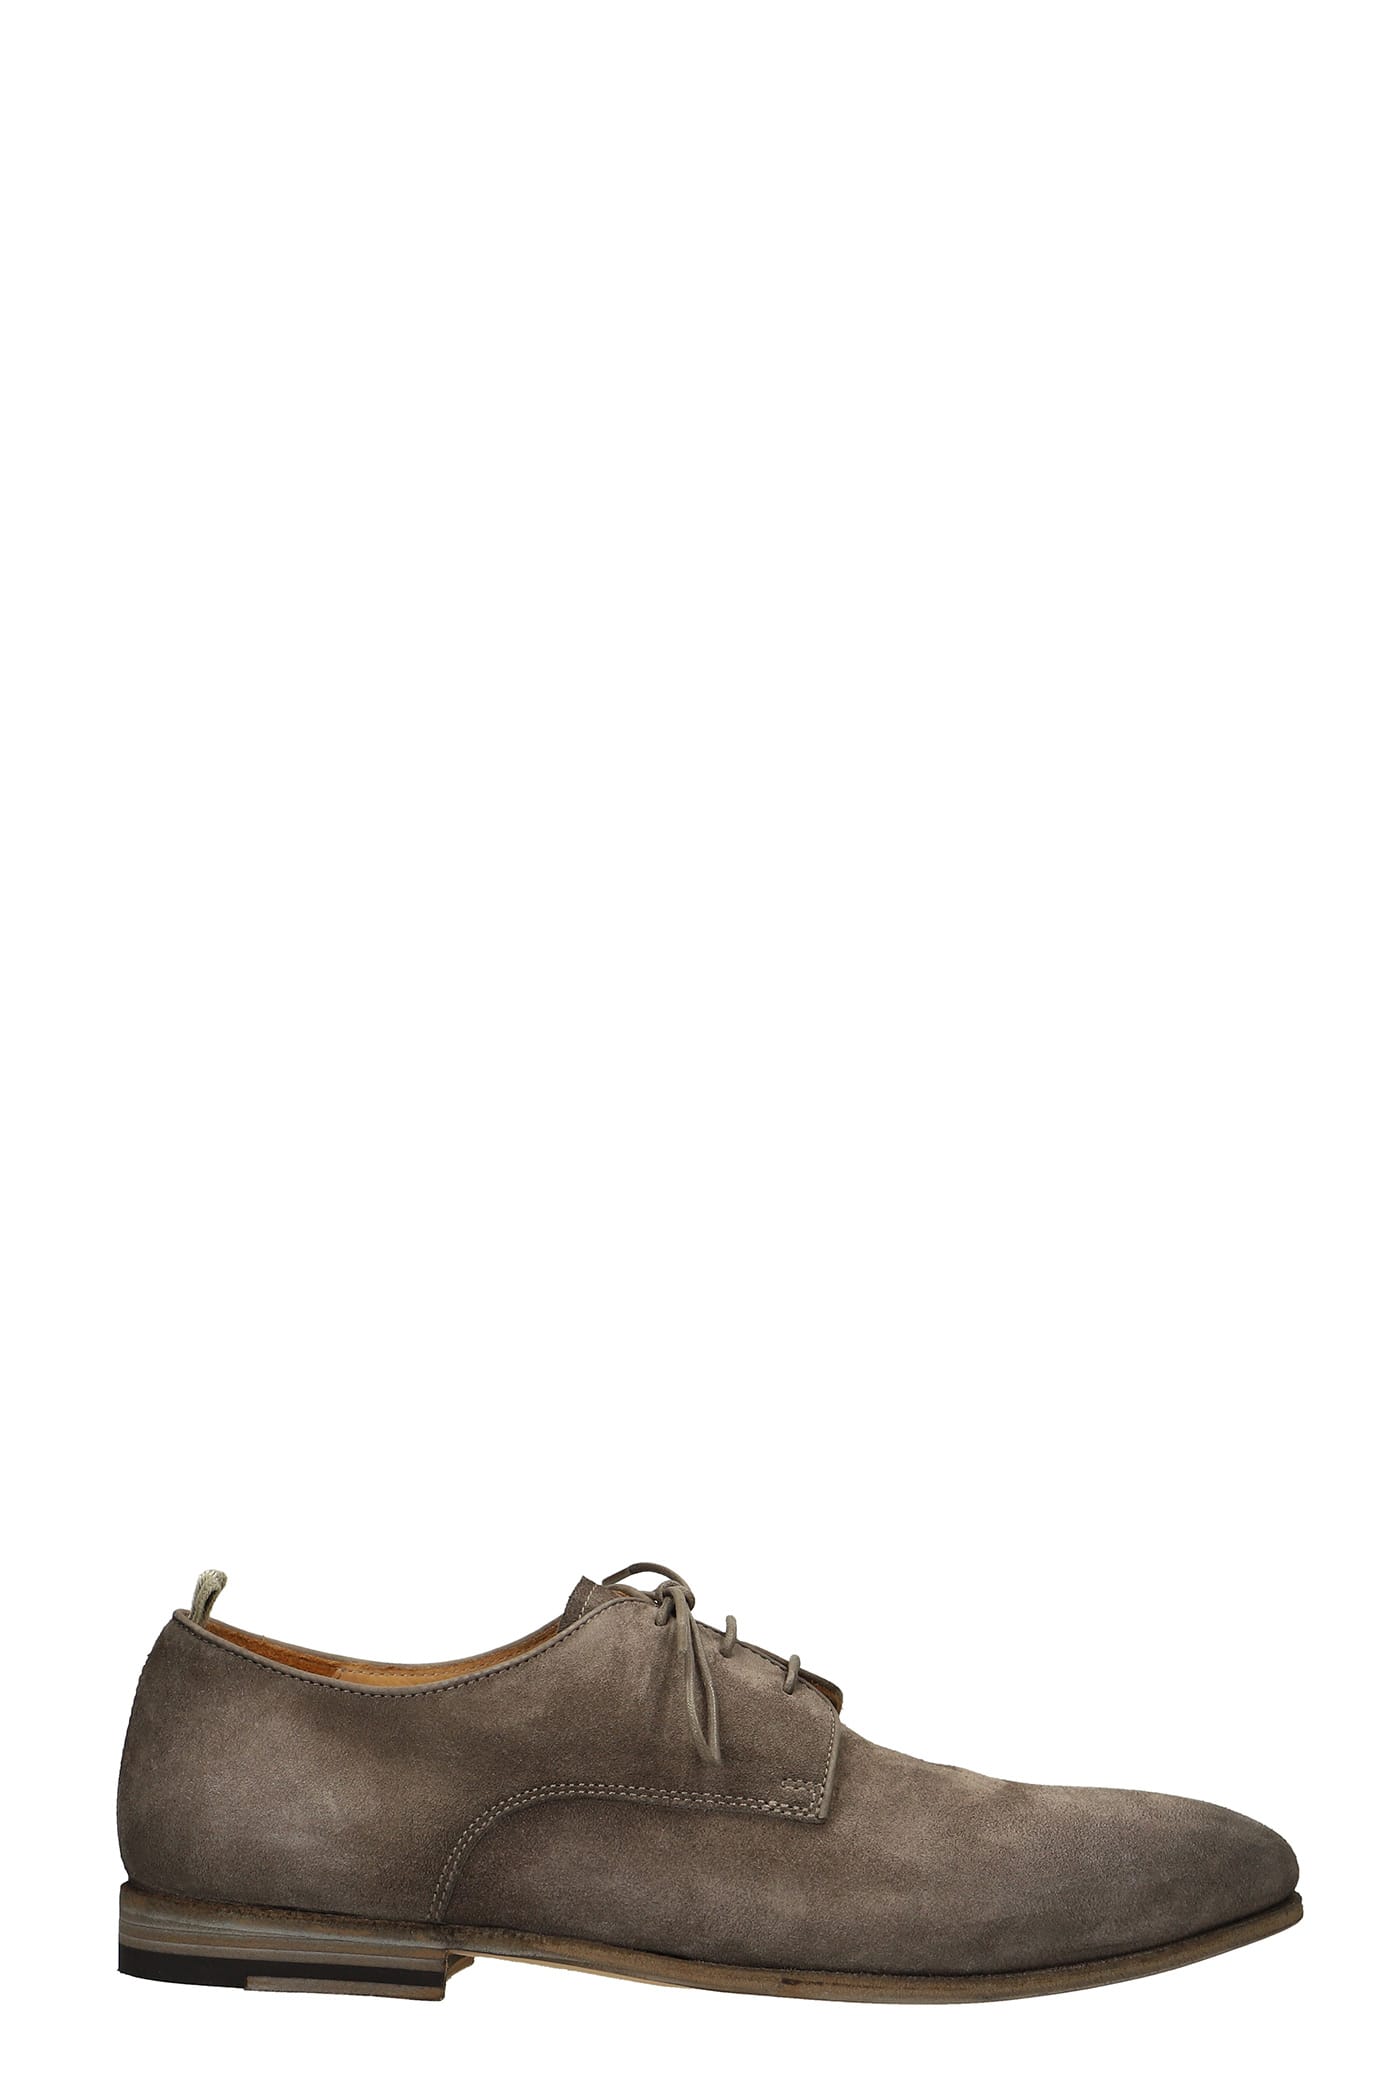 Officine Creative Lace Up Shoes In Taupe Suede